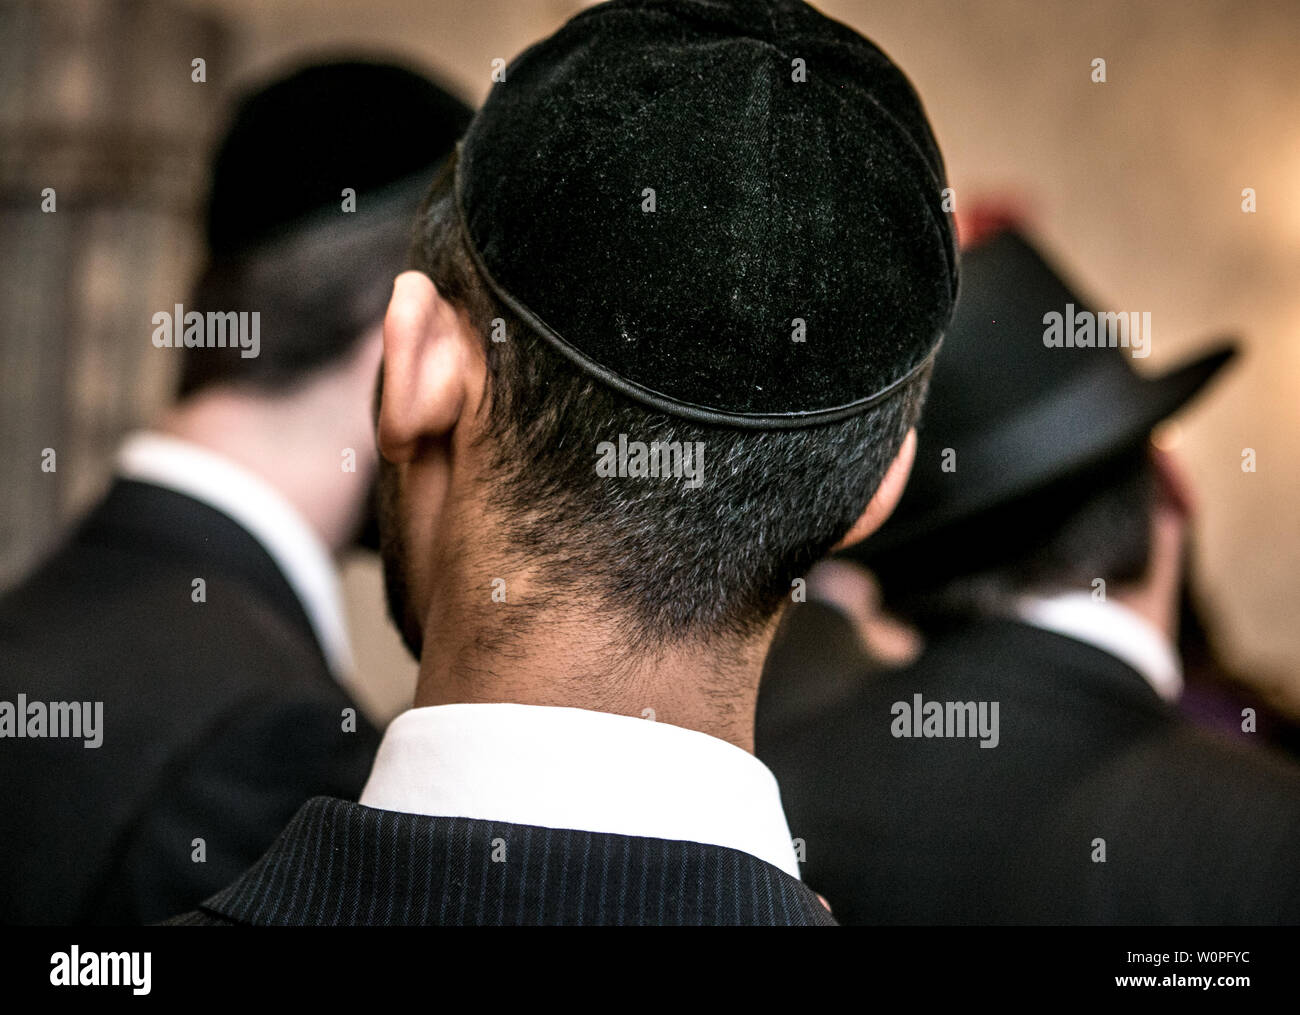 3 Jews from behind in synagogue Stock Photo